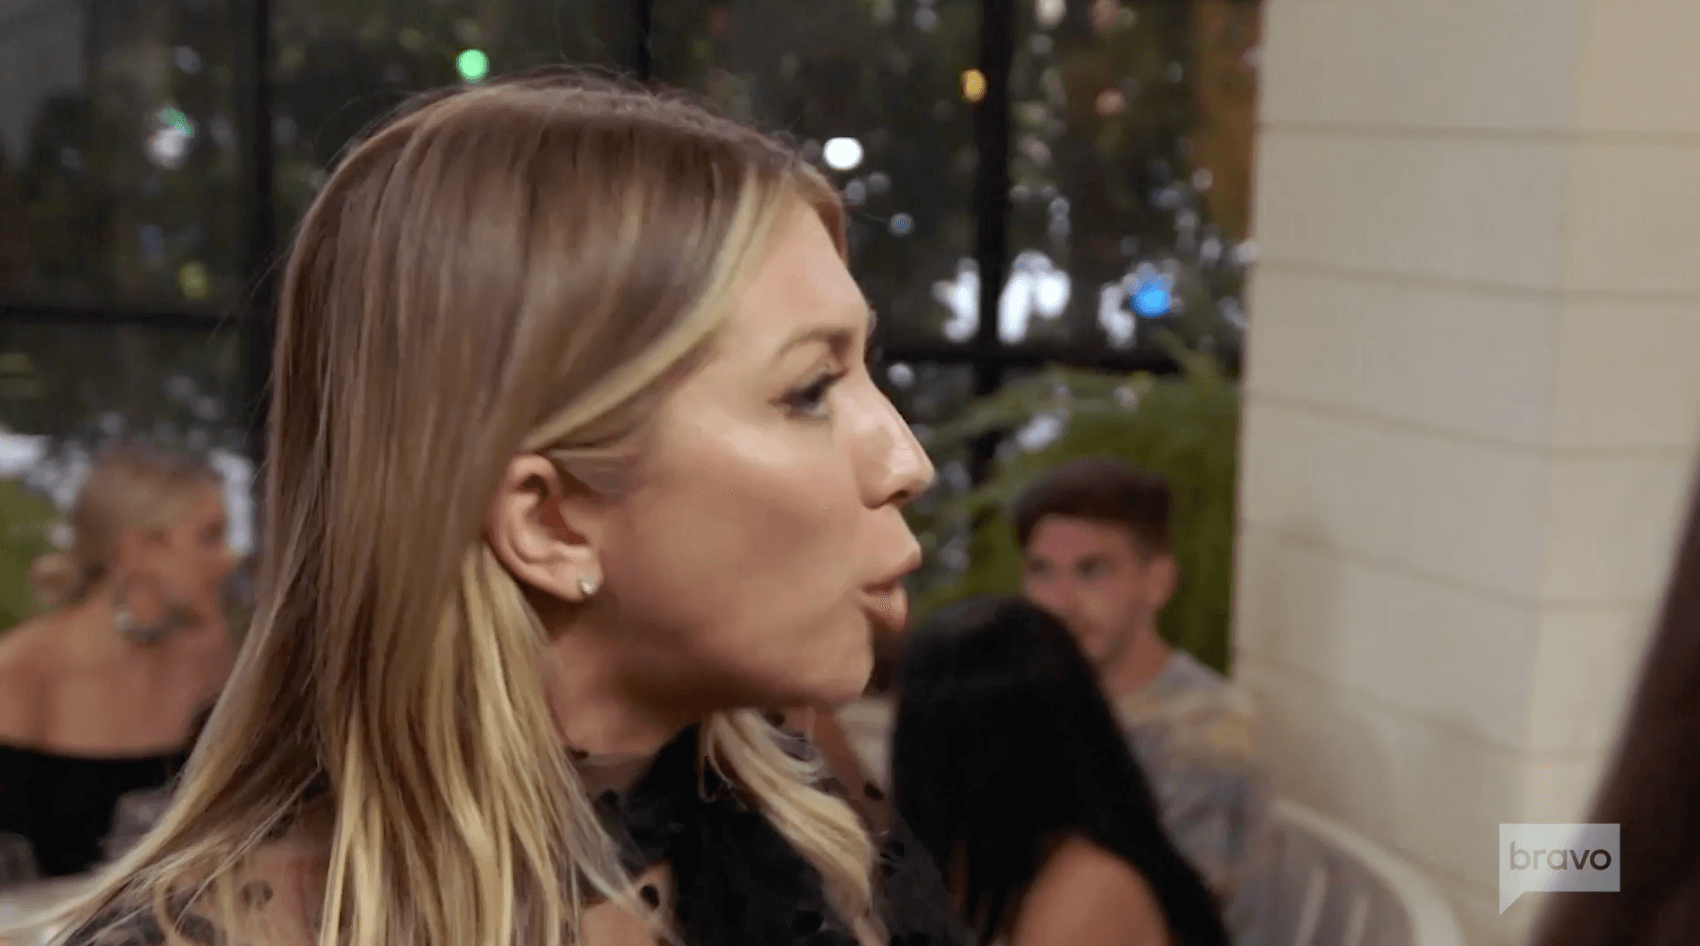 Stassi Schroeder and Kristen Doute Begged Andy Cohen To Not Fire Them From ‘Vanderpump Rules’